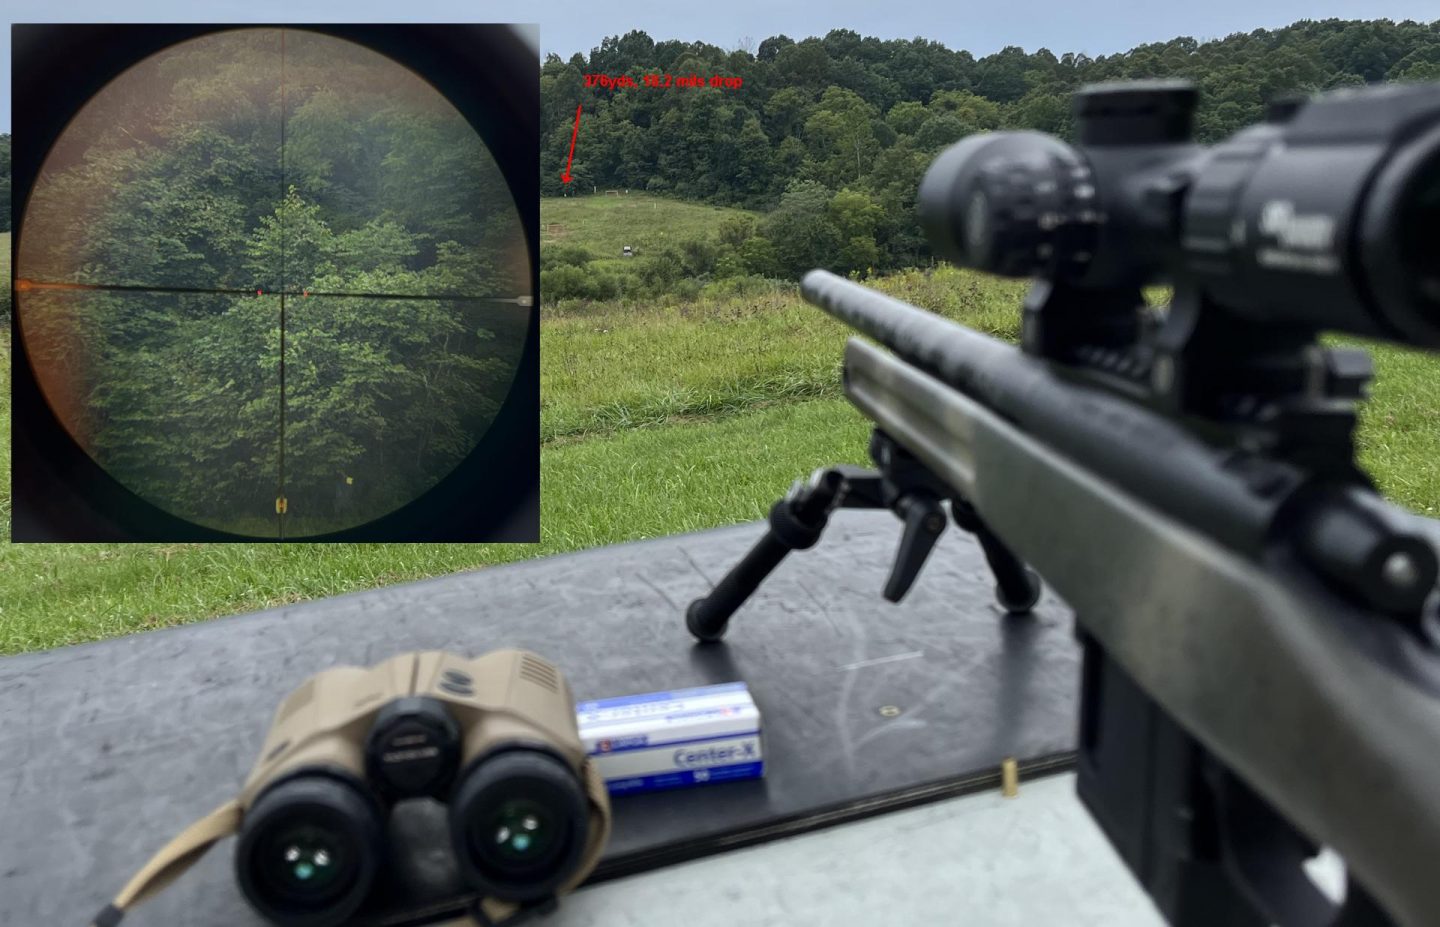 Shooting the BDX 2.0 system 376yds with 18.2mils drop from a Vudoo V-22 with Proof barrel